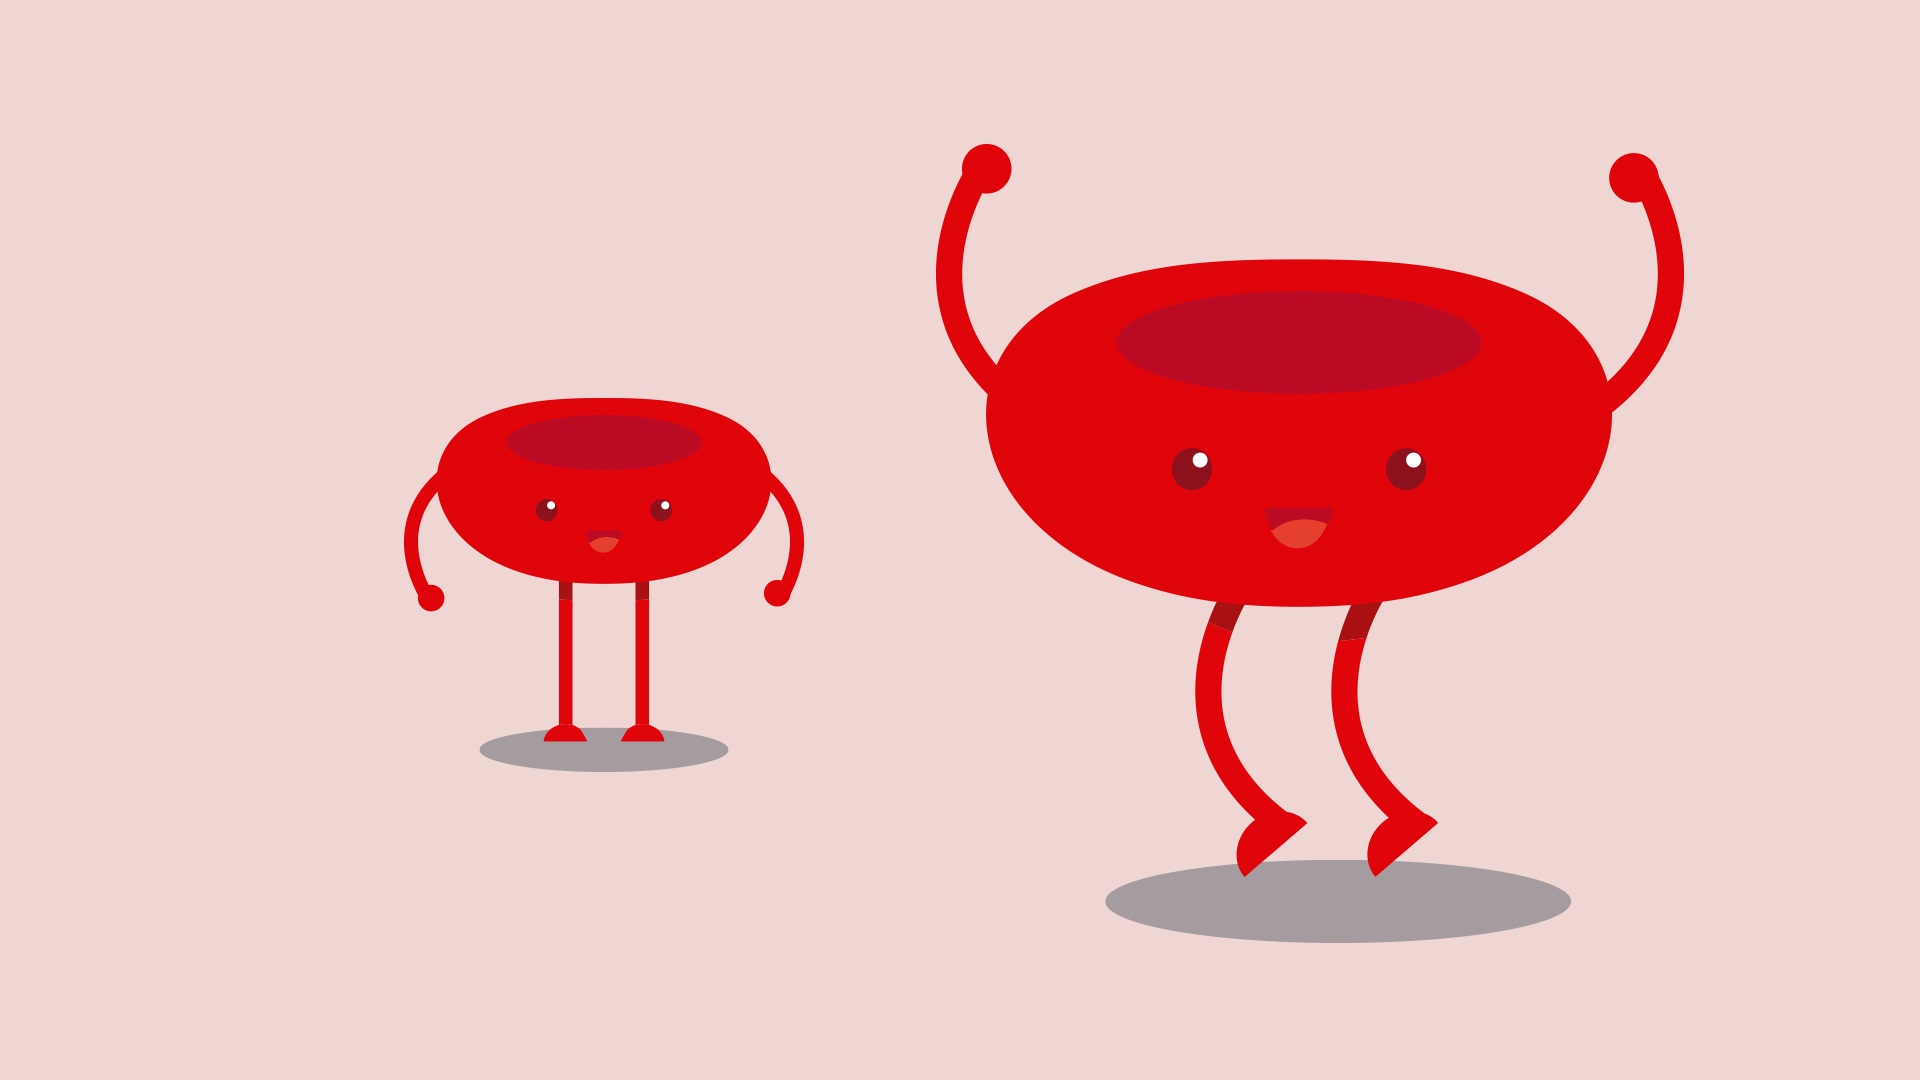 Character design for a 2D animated red-blood cell